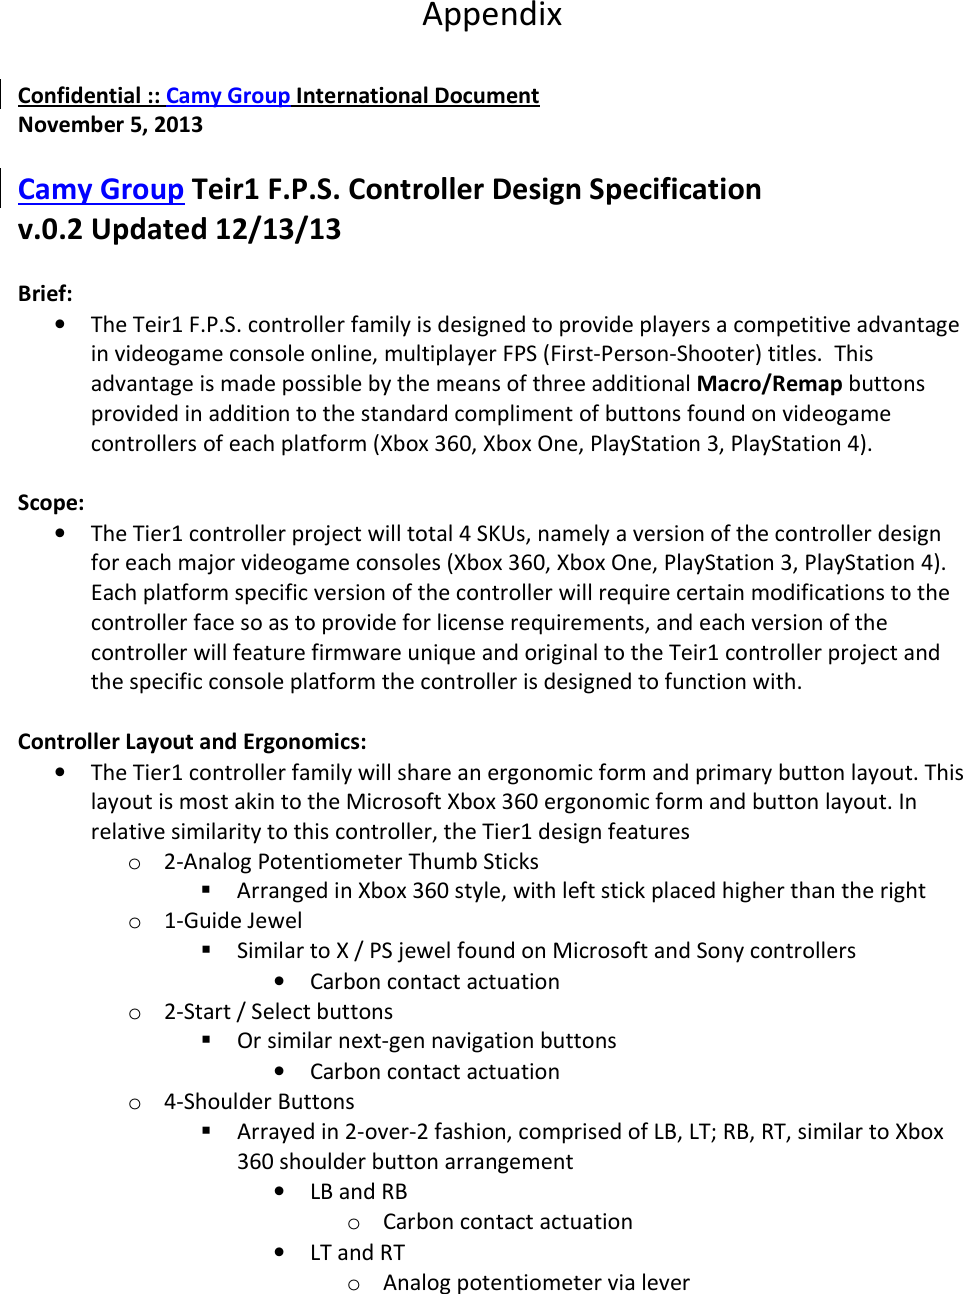 Appendix   Confidential :: Camy Group International Document November 5, 2013  Camy Group Teir1 F.P.S. Controller Design Specification v.0.2 Updated 12/13/13  Brief: • The Teir1 F.P.S. controller family is designed to provide players a competitive advantage in videogame console online, multiplayer FPS (First-Person-Shooter) titles.  This advantage is made possible by the means of three additional Macro/Remap buttons provided in addition to the standard compliment of buttons found on videogame controllers of each platform (Xbox 360, Xbox One, PlayStation 3, PlayStation 4).   Scope: • The Tier1 controller project will total 4 SKUs, namely a version of the controller design for each major videogame consoles (Xbox 360, Xbox One, PlayStation 3, PlayStation 4). Each platform specific version of the controller will require certain modifications to the controller face so as to provide for license requirements, and each version of the controller will feature firmware unique and original to the Teir1 controller project and the specific console platform the controller is designed to function with.   Controller Layout and Ergonomics: • The Tier1 controller family will share an ergonomic form and primary button layout. This layout is most akin to the Microsoft Xbox 360 ergonomic form and button layout. In relative similarity to this controller, the Tier1 design features o 2-Analog Potentiometer Thumb Sticks  Arranged in Xbox 360 style, with left stick placed higher than the right o 1-Guide Jewel  Similar to X / PS jewel found on Microsoft and Sony controllers • Carbon contact actuation o 2-Start / Select buttons  Or similar next-gen navigation buttons • Carbon contact actuation o 4-Shoulder Buttons  Arrayed in 2-over-2 fashion, comprised of LB, LT; RB, RT, similar to Xbox 360 shoulder button arrangement • LB and RB o Carbon contact actuation • LT and RT o Analog potentiometer via lever 